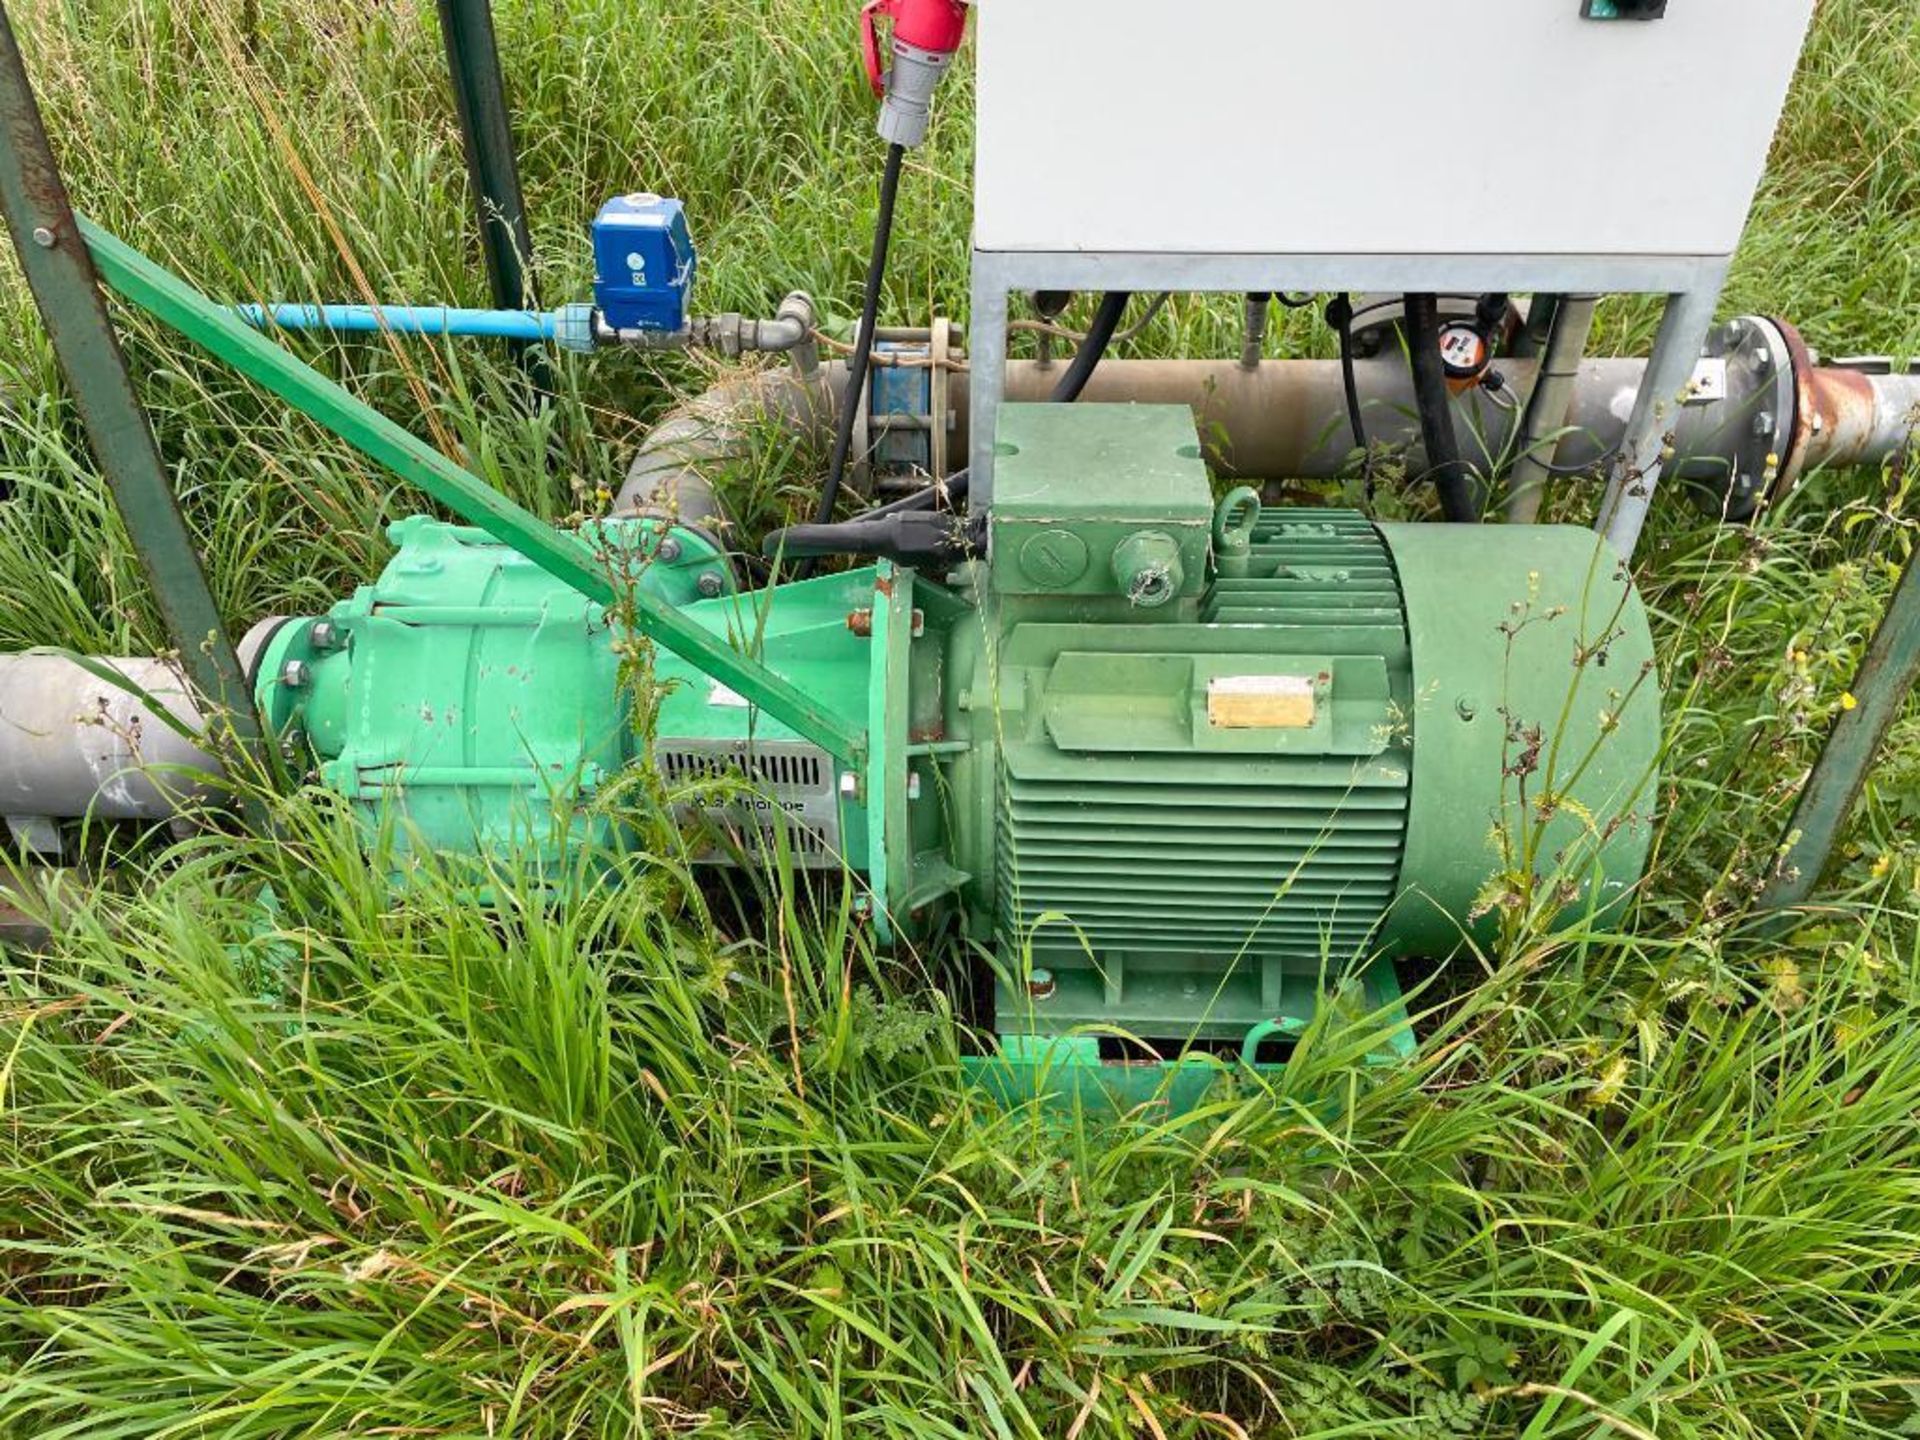 Electric irrigation transfer pump with Unico control panel with auto flow and auto pressure controls - Image 3 of 4